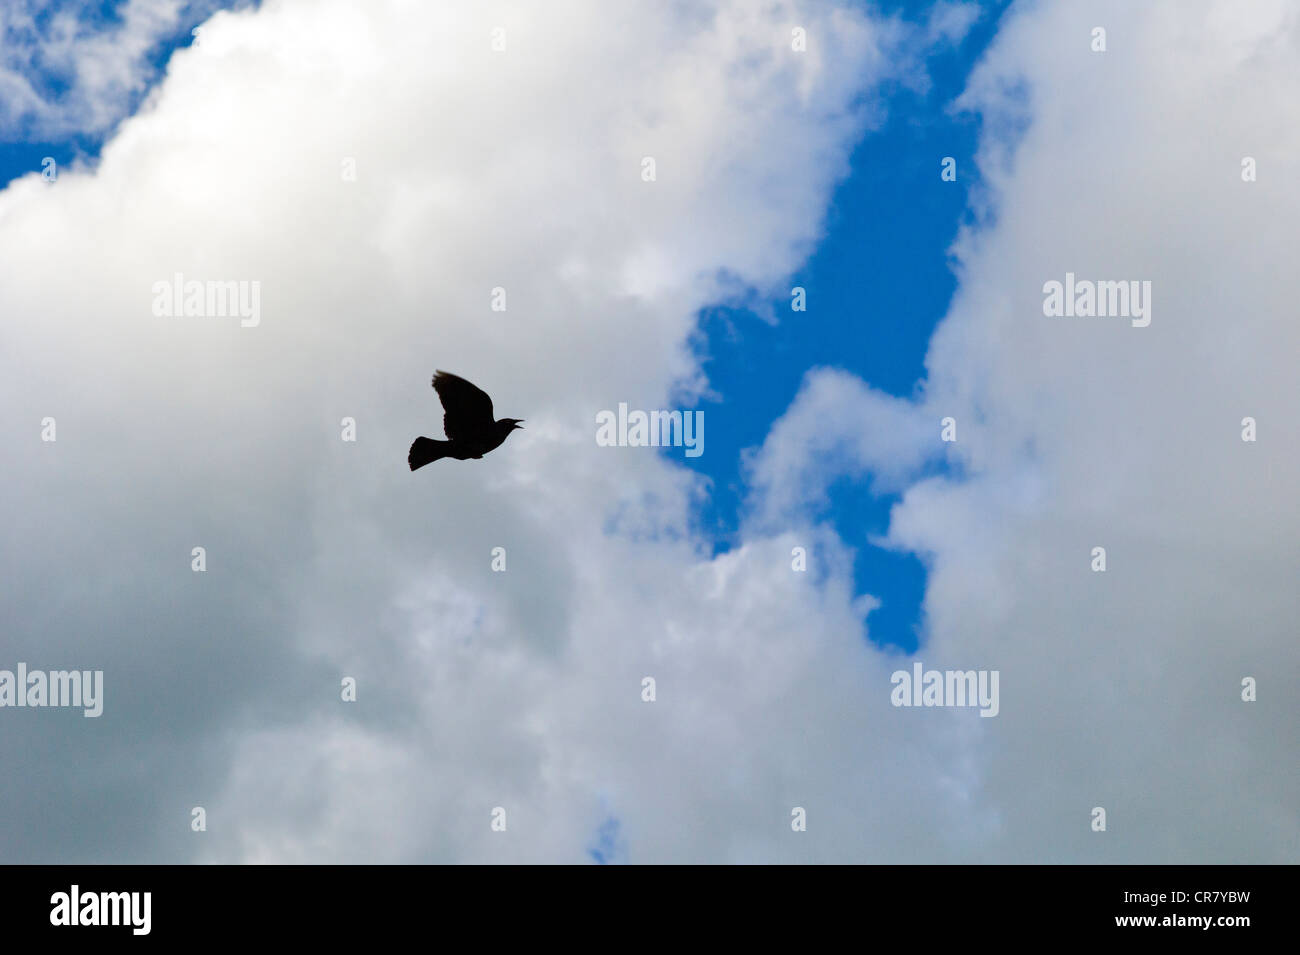 Blackbird in flight against puffy white clouds and a clear blue sky Stock Photo